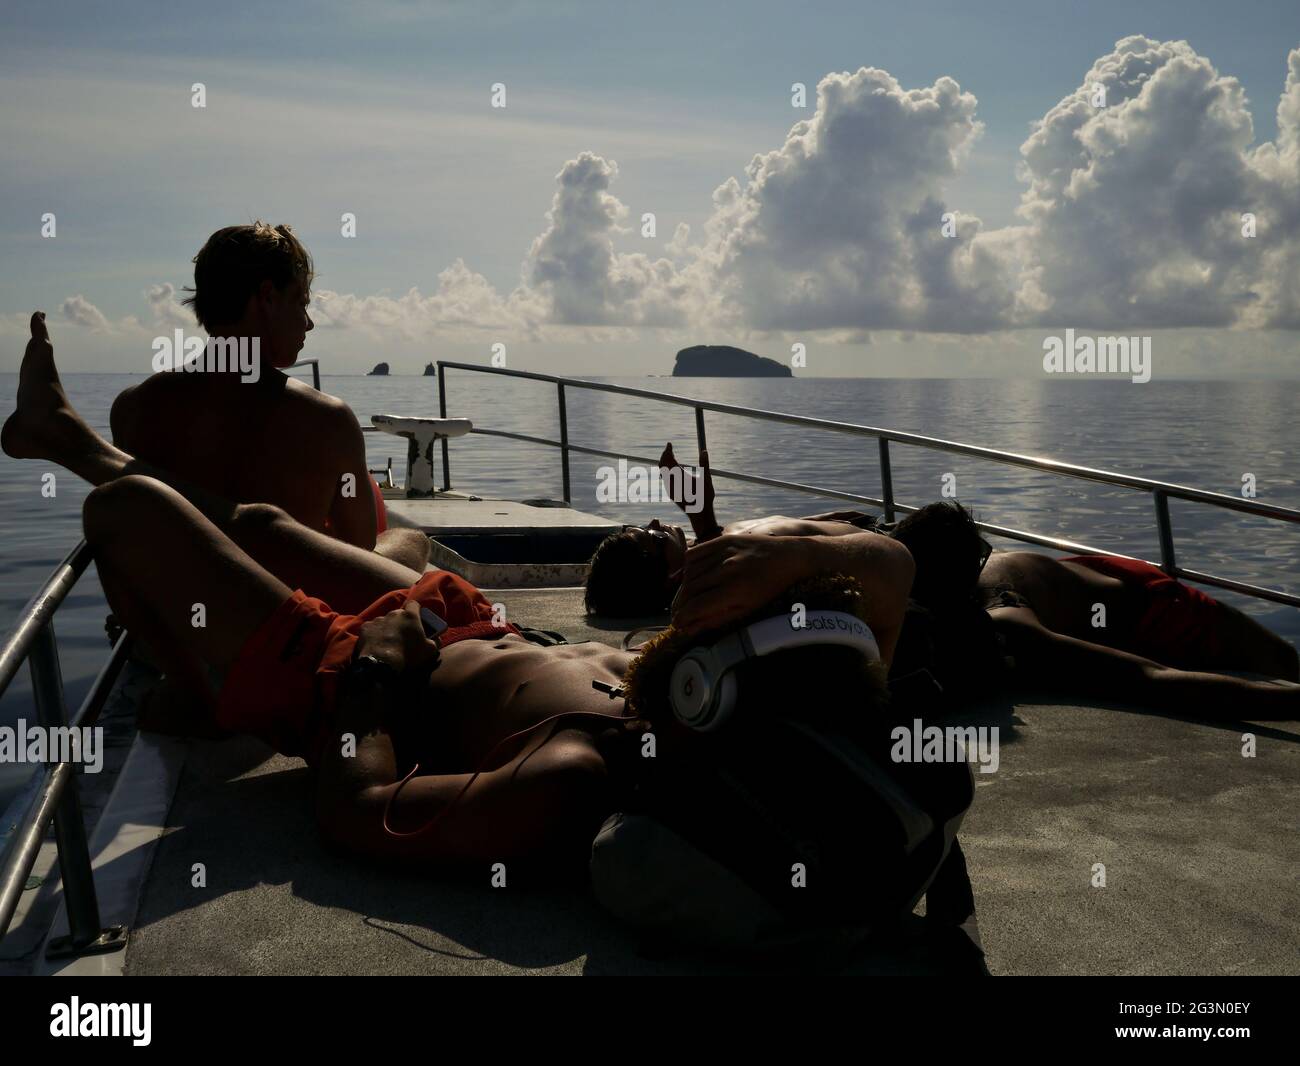 A group of friends lazing in the sun, on a boat from Bali to the Gili islands. Indonesia. Stock Photo